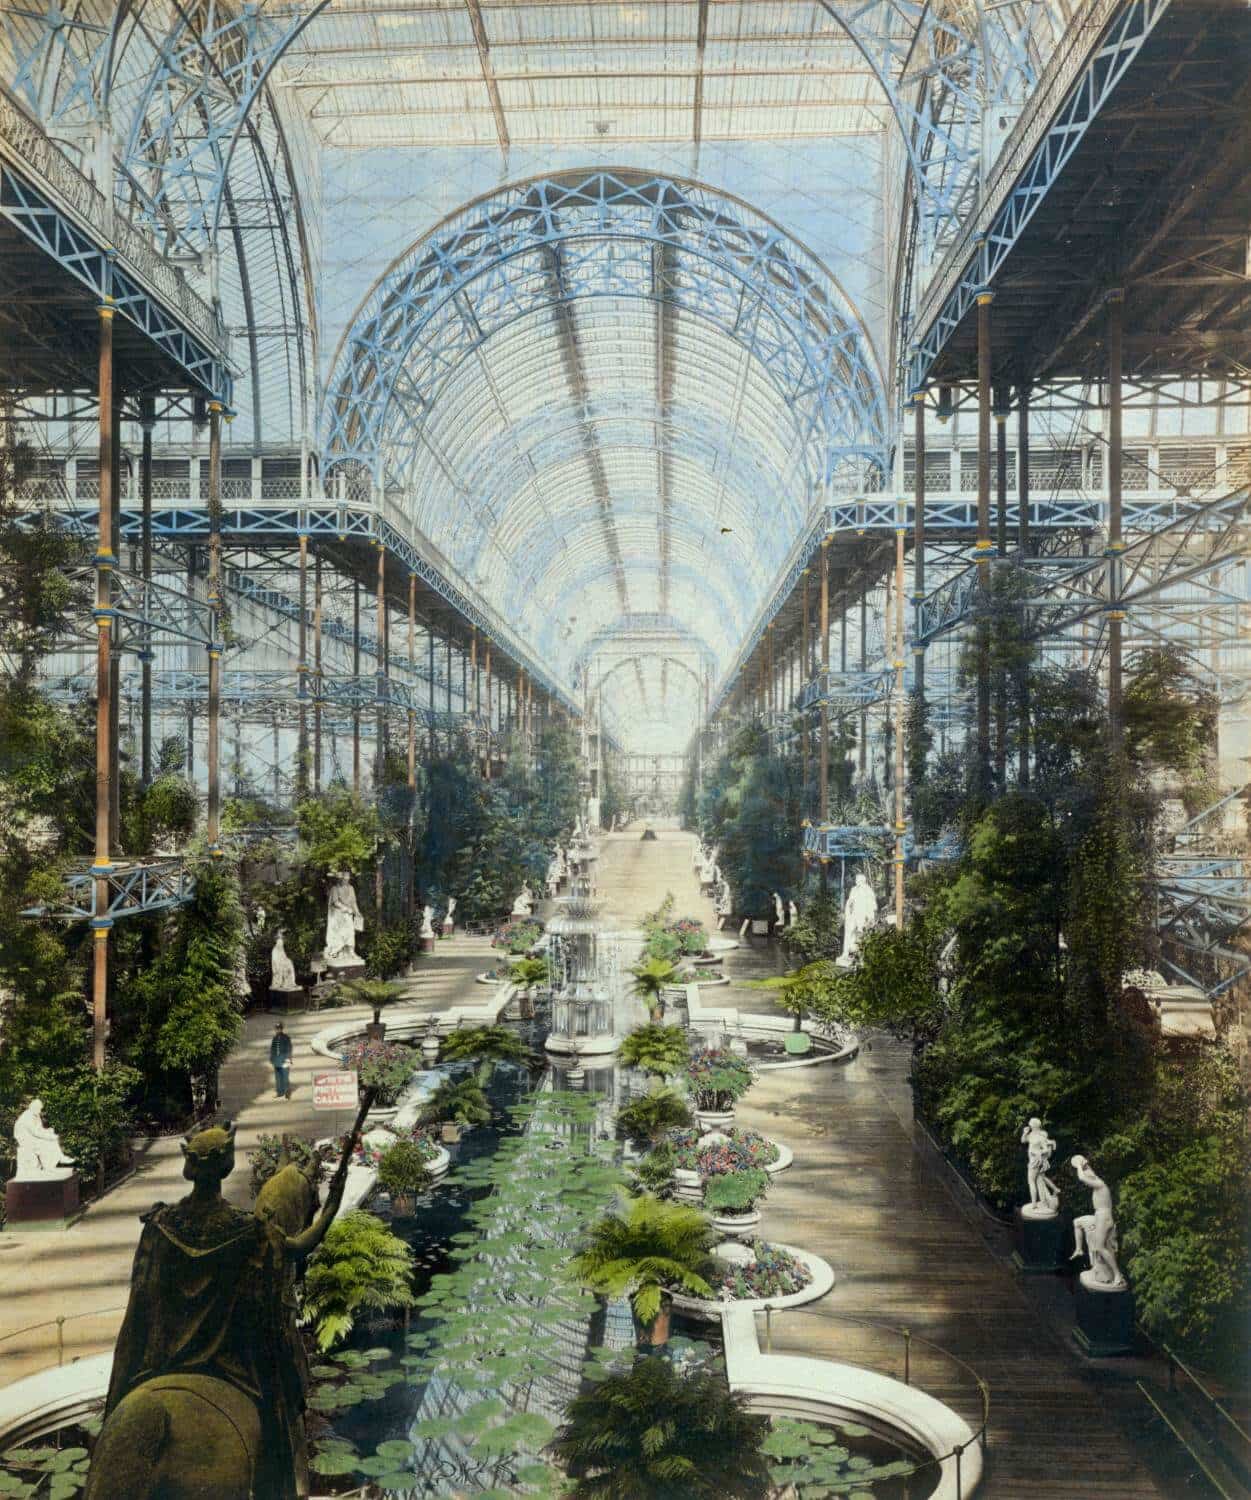 The interior of the Crystal Palace circa 1859, eight years after the Great Exhibition. Source: Historic England Archive